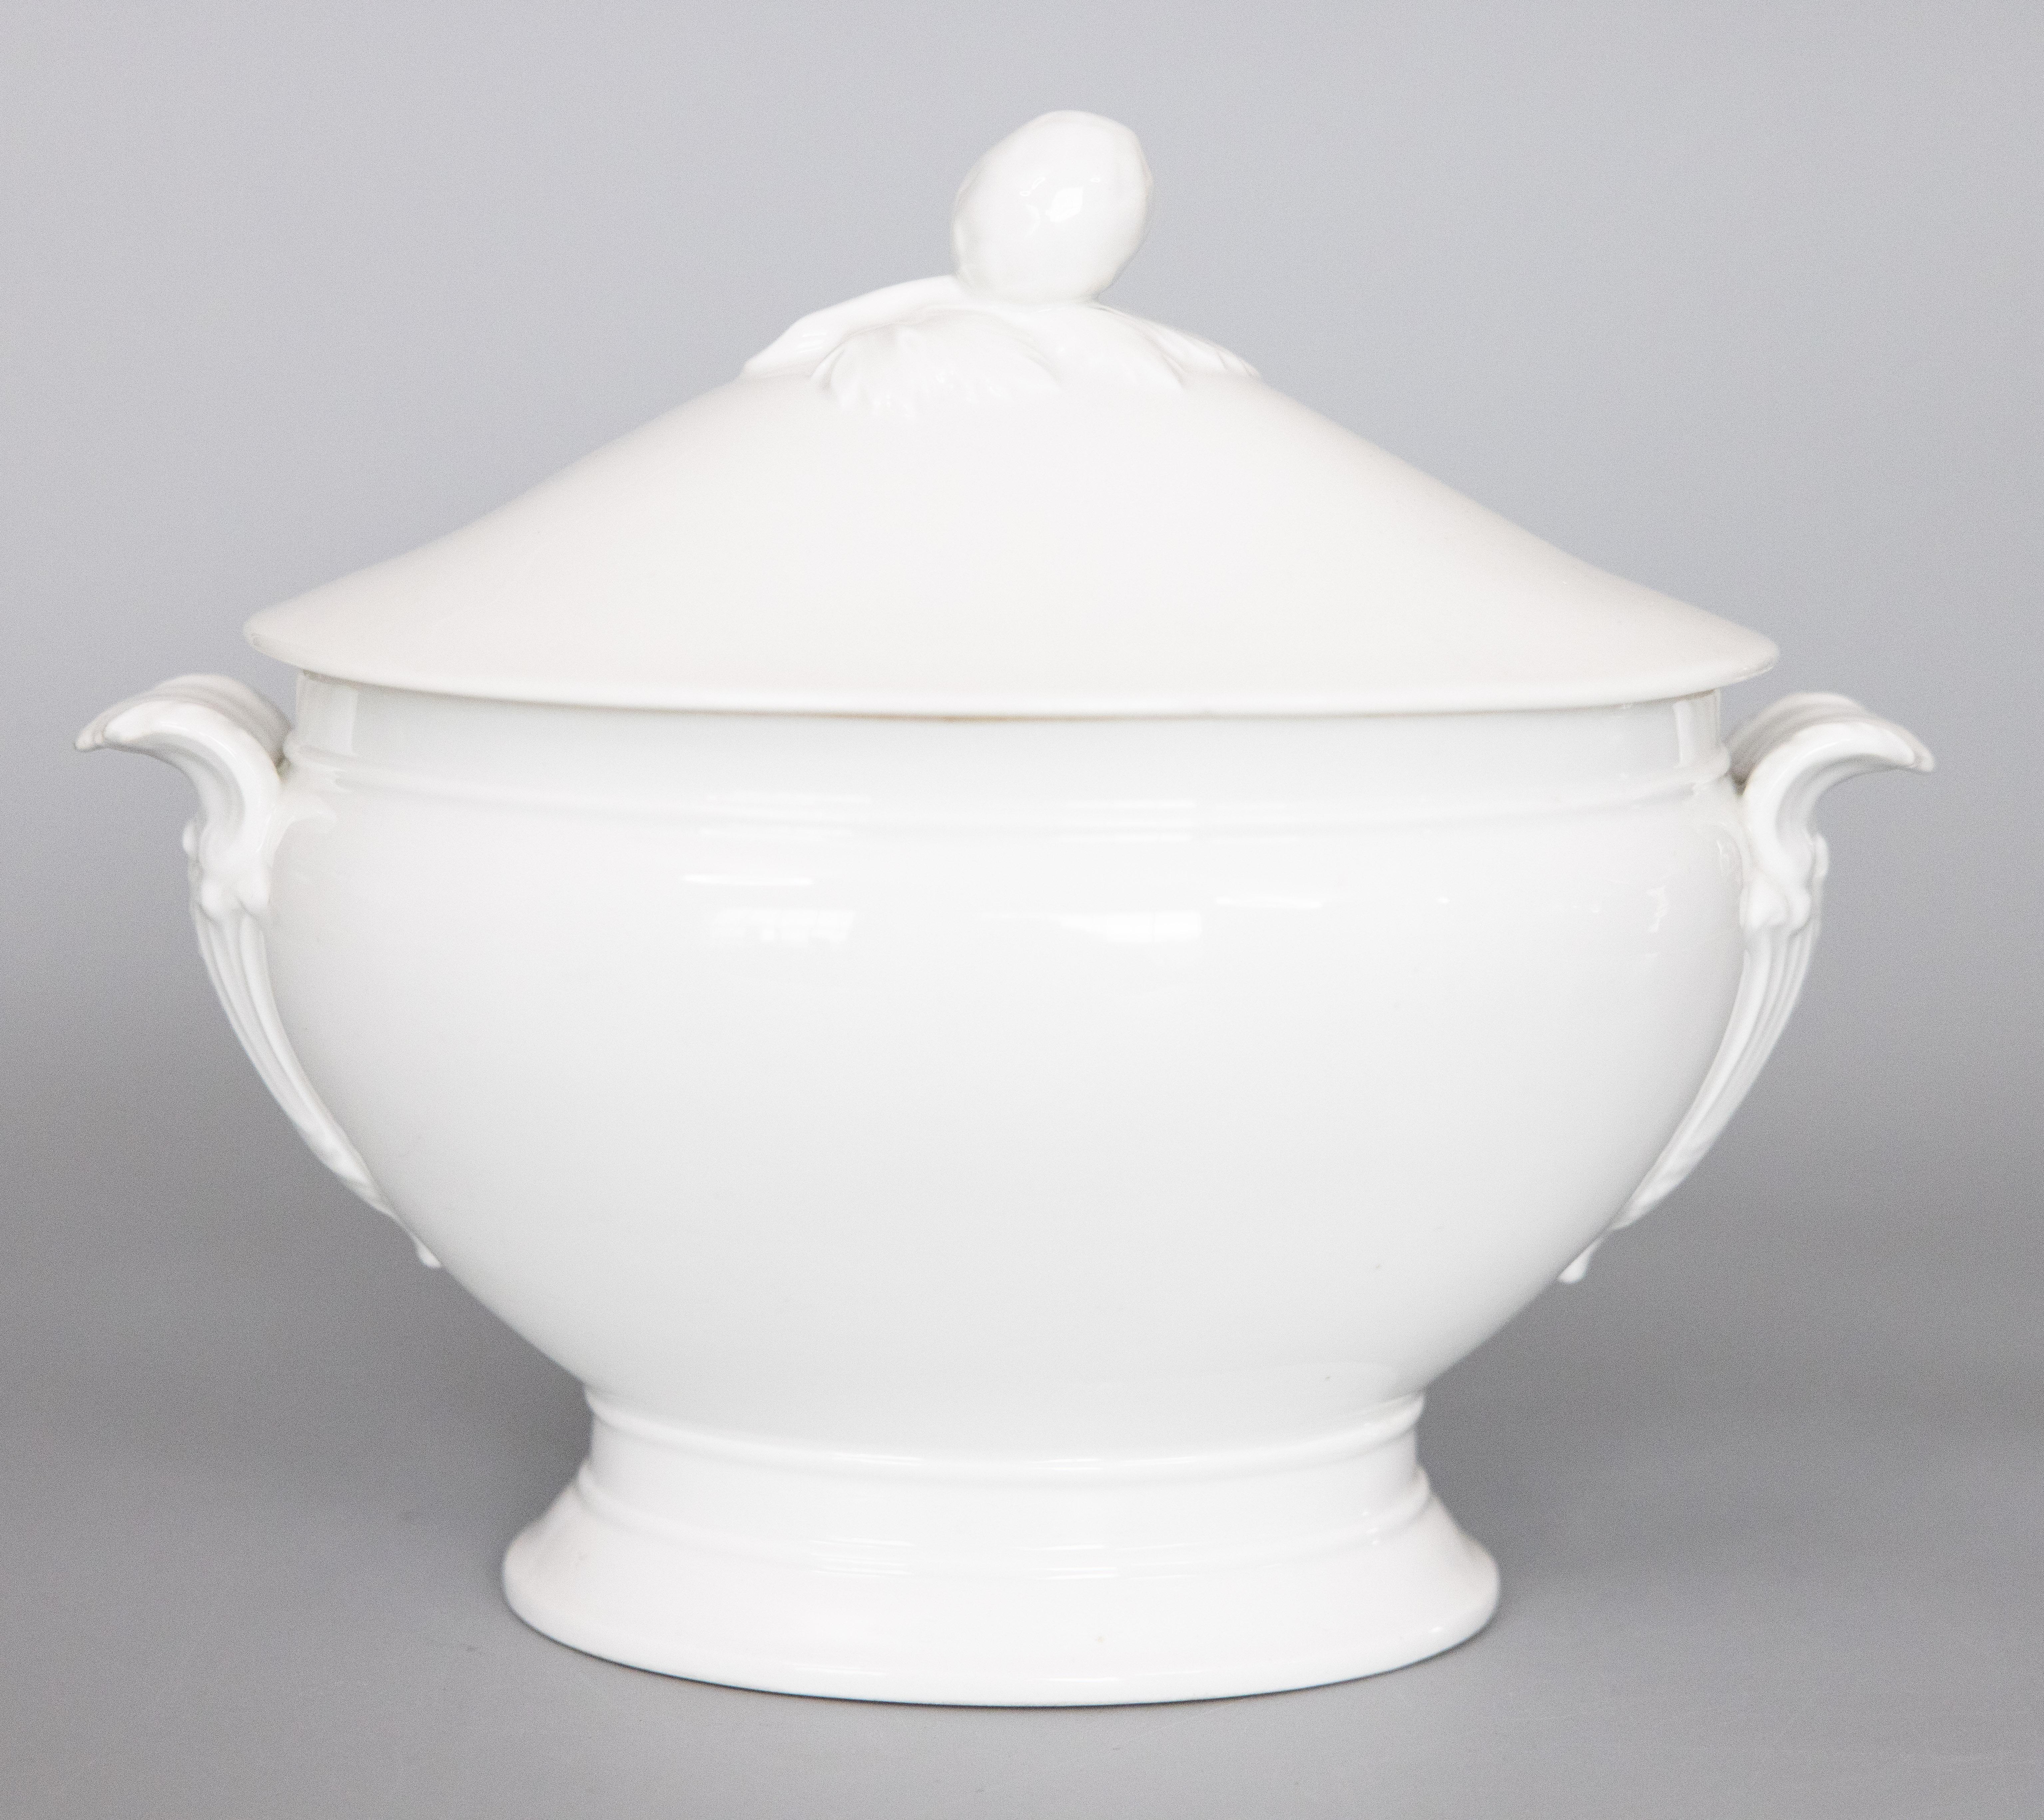 Antique French White Ironstone Oval Lidded Soup Tureen Soupière In Good Condition For Sale In Pearland, TX